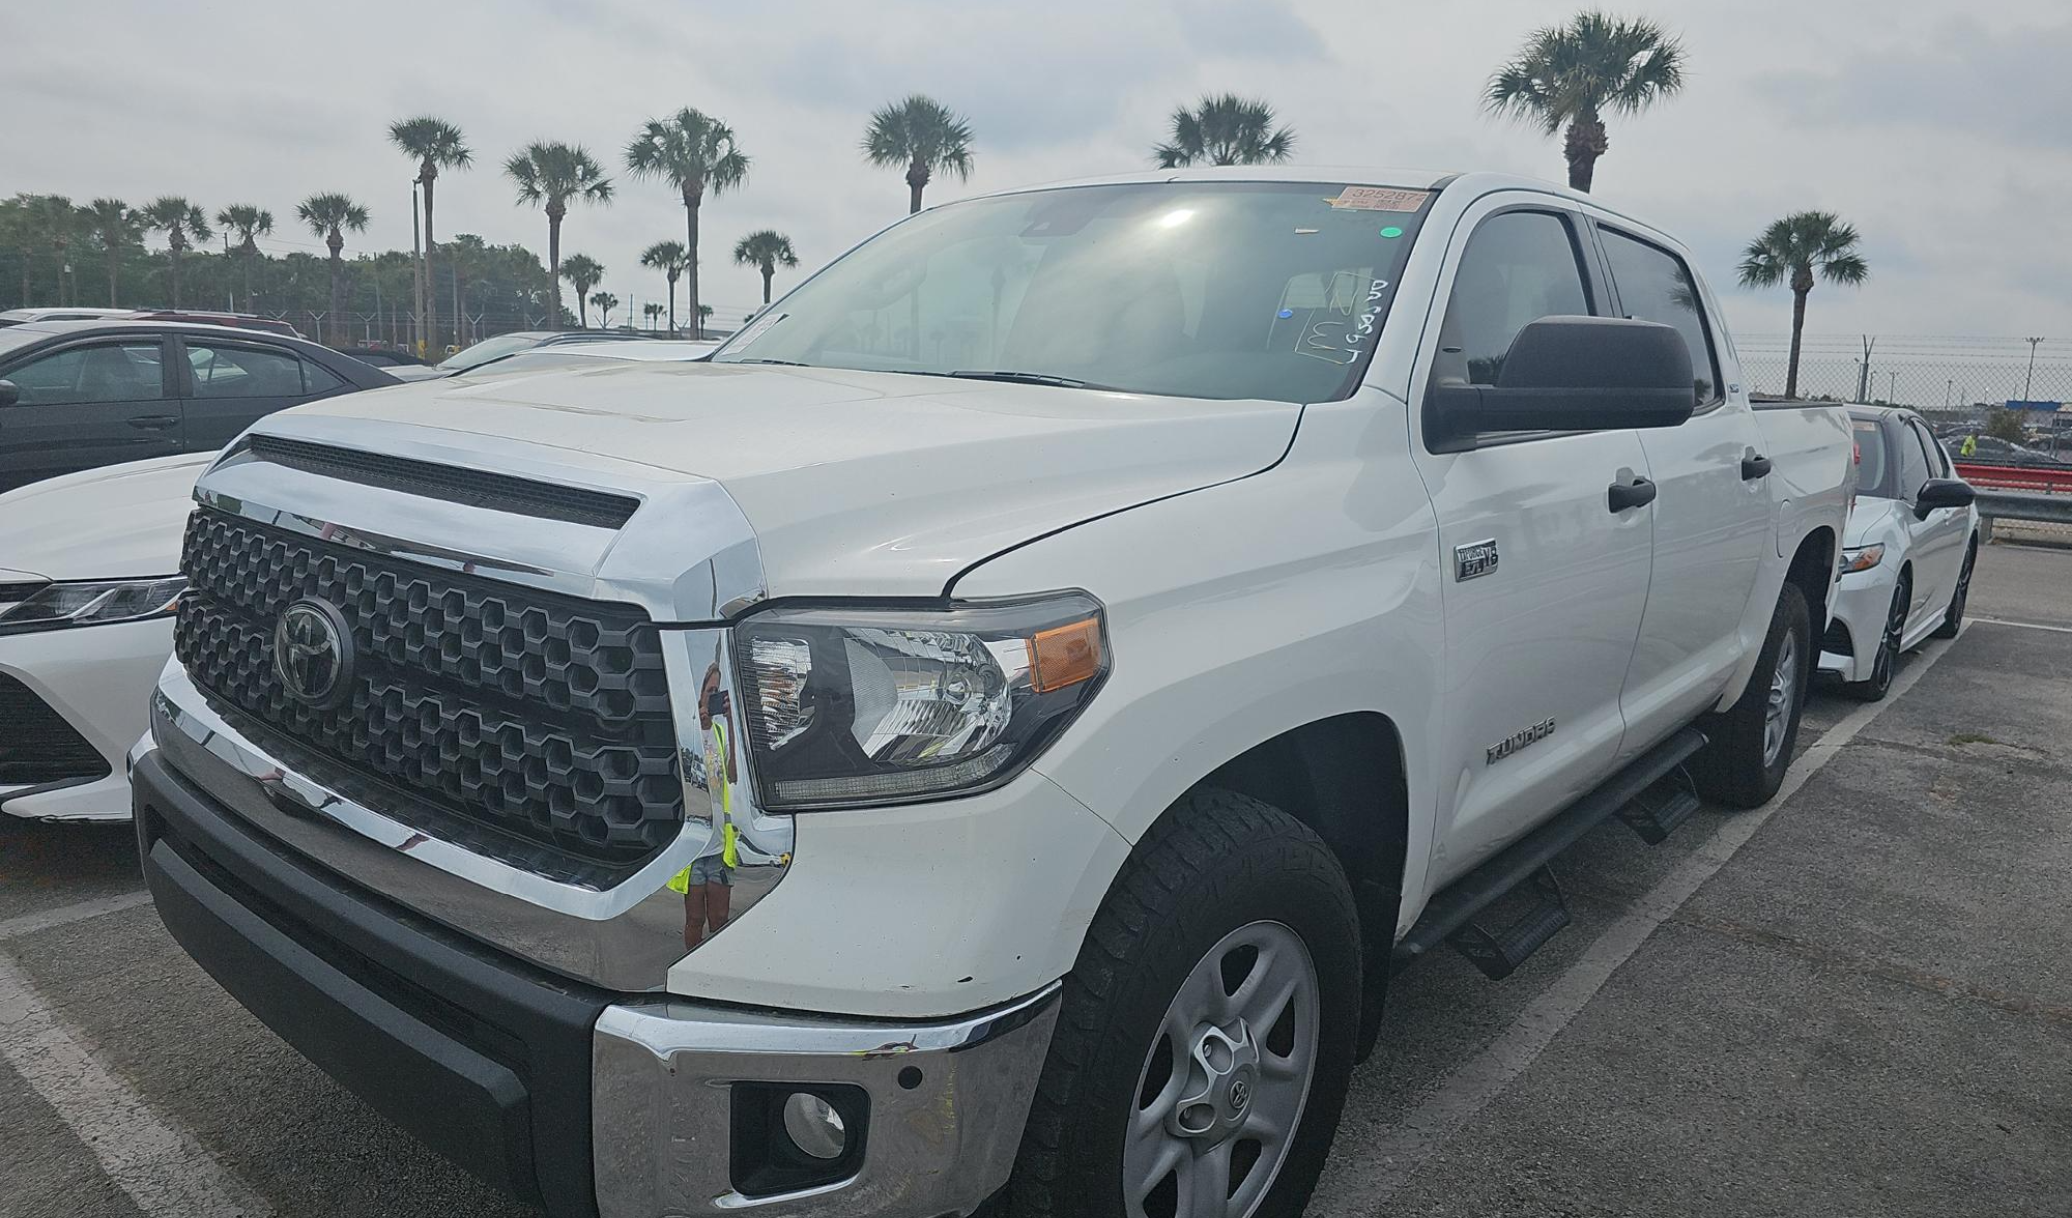 2021 Toyota Tundra for sale in Gainesville FL 32609 by Veneauto Cars